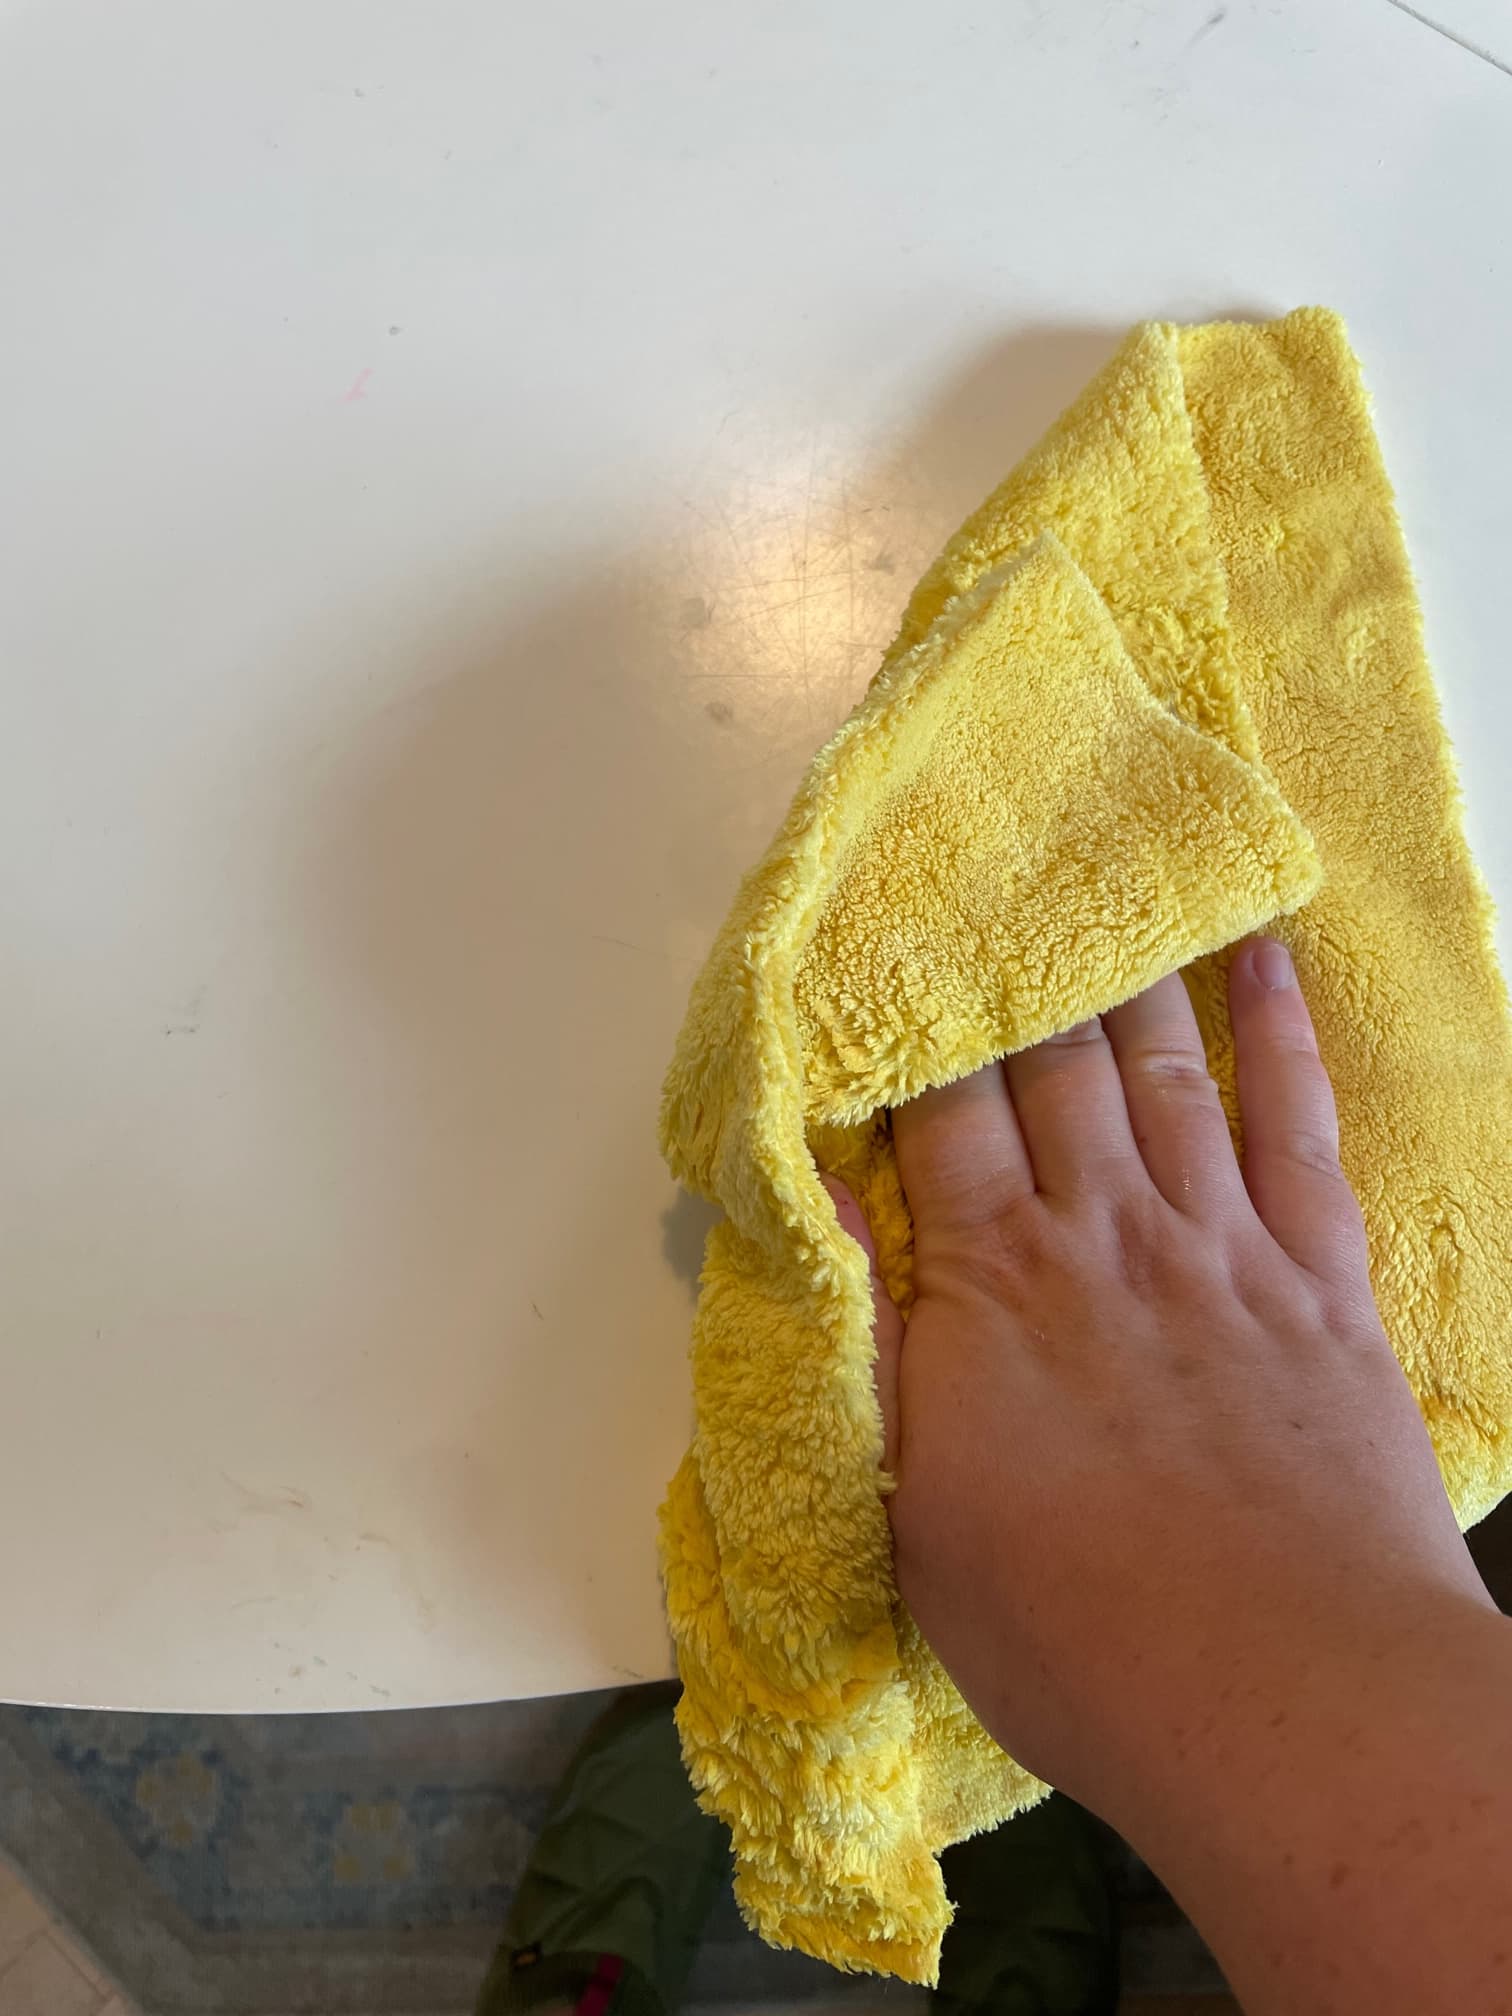 Product Review : scrub daddy streakless cloths These are great!!! ….